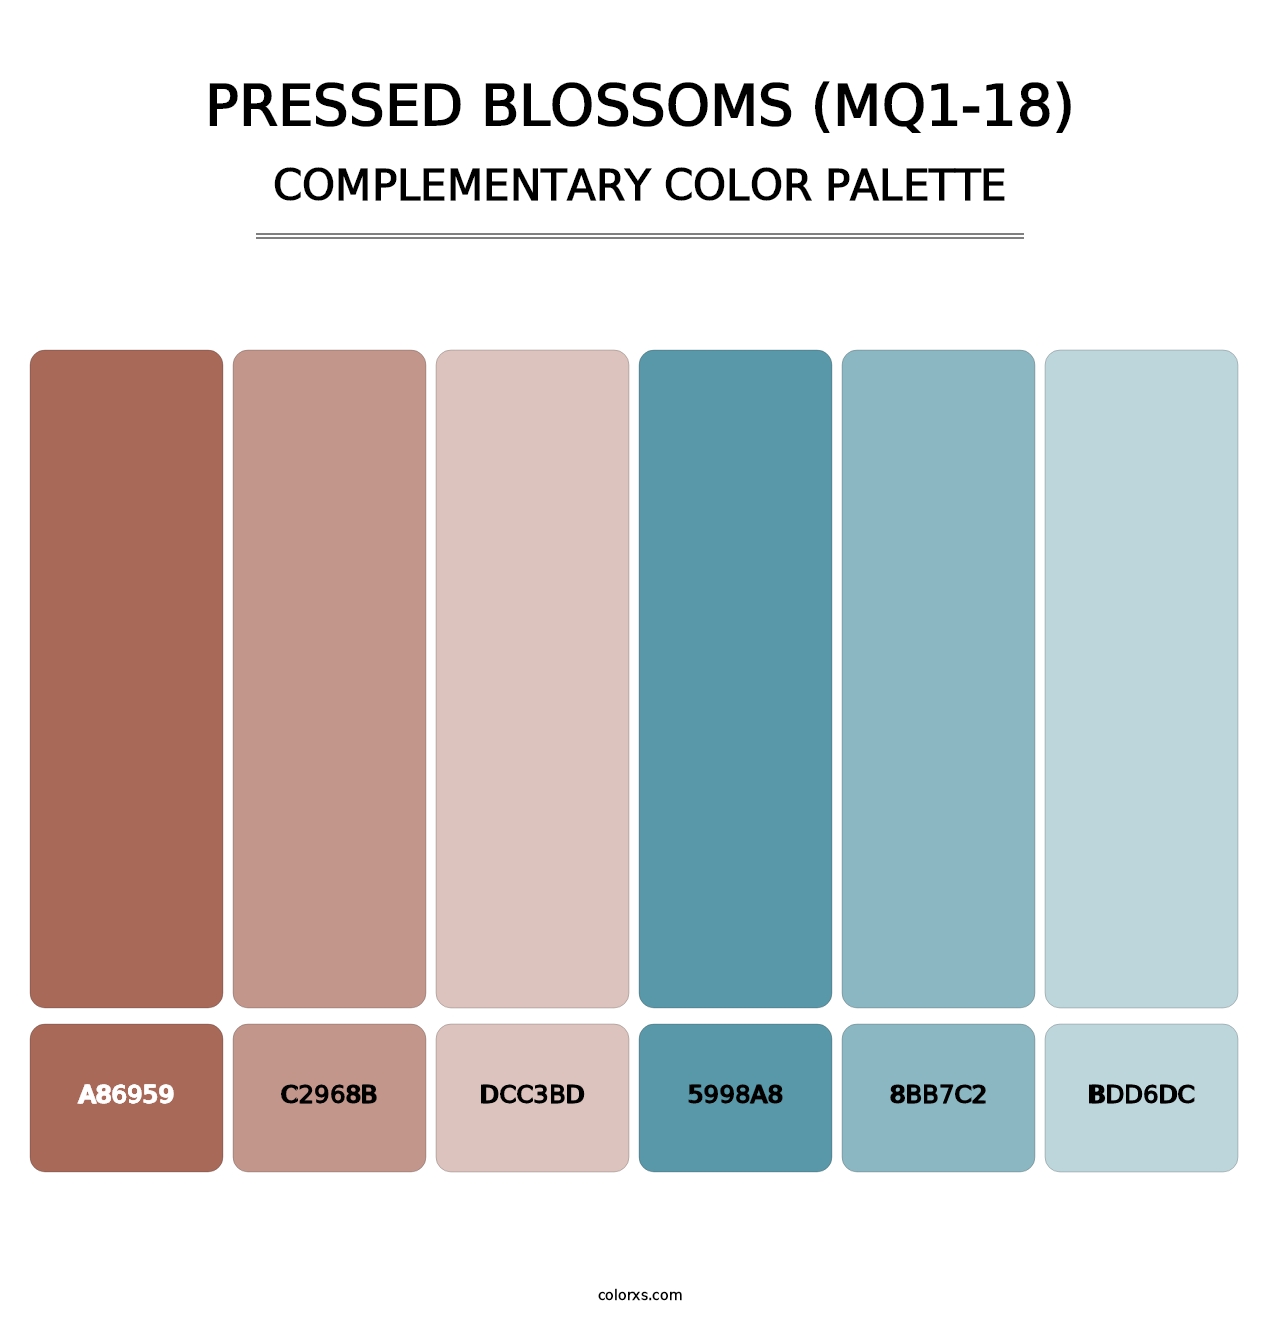 Pressed Blossoms (MQ1-18) - Complementary Color Palette